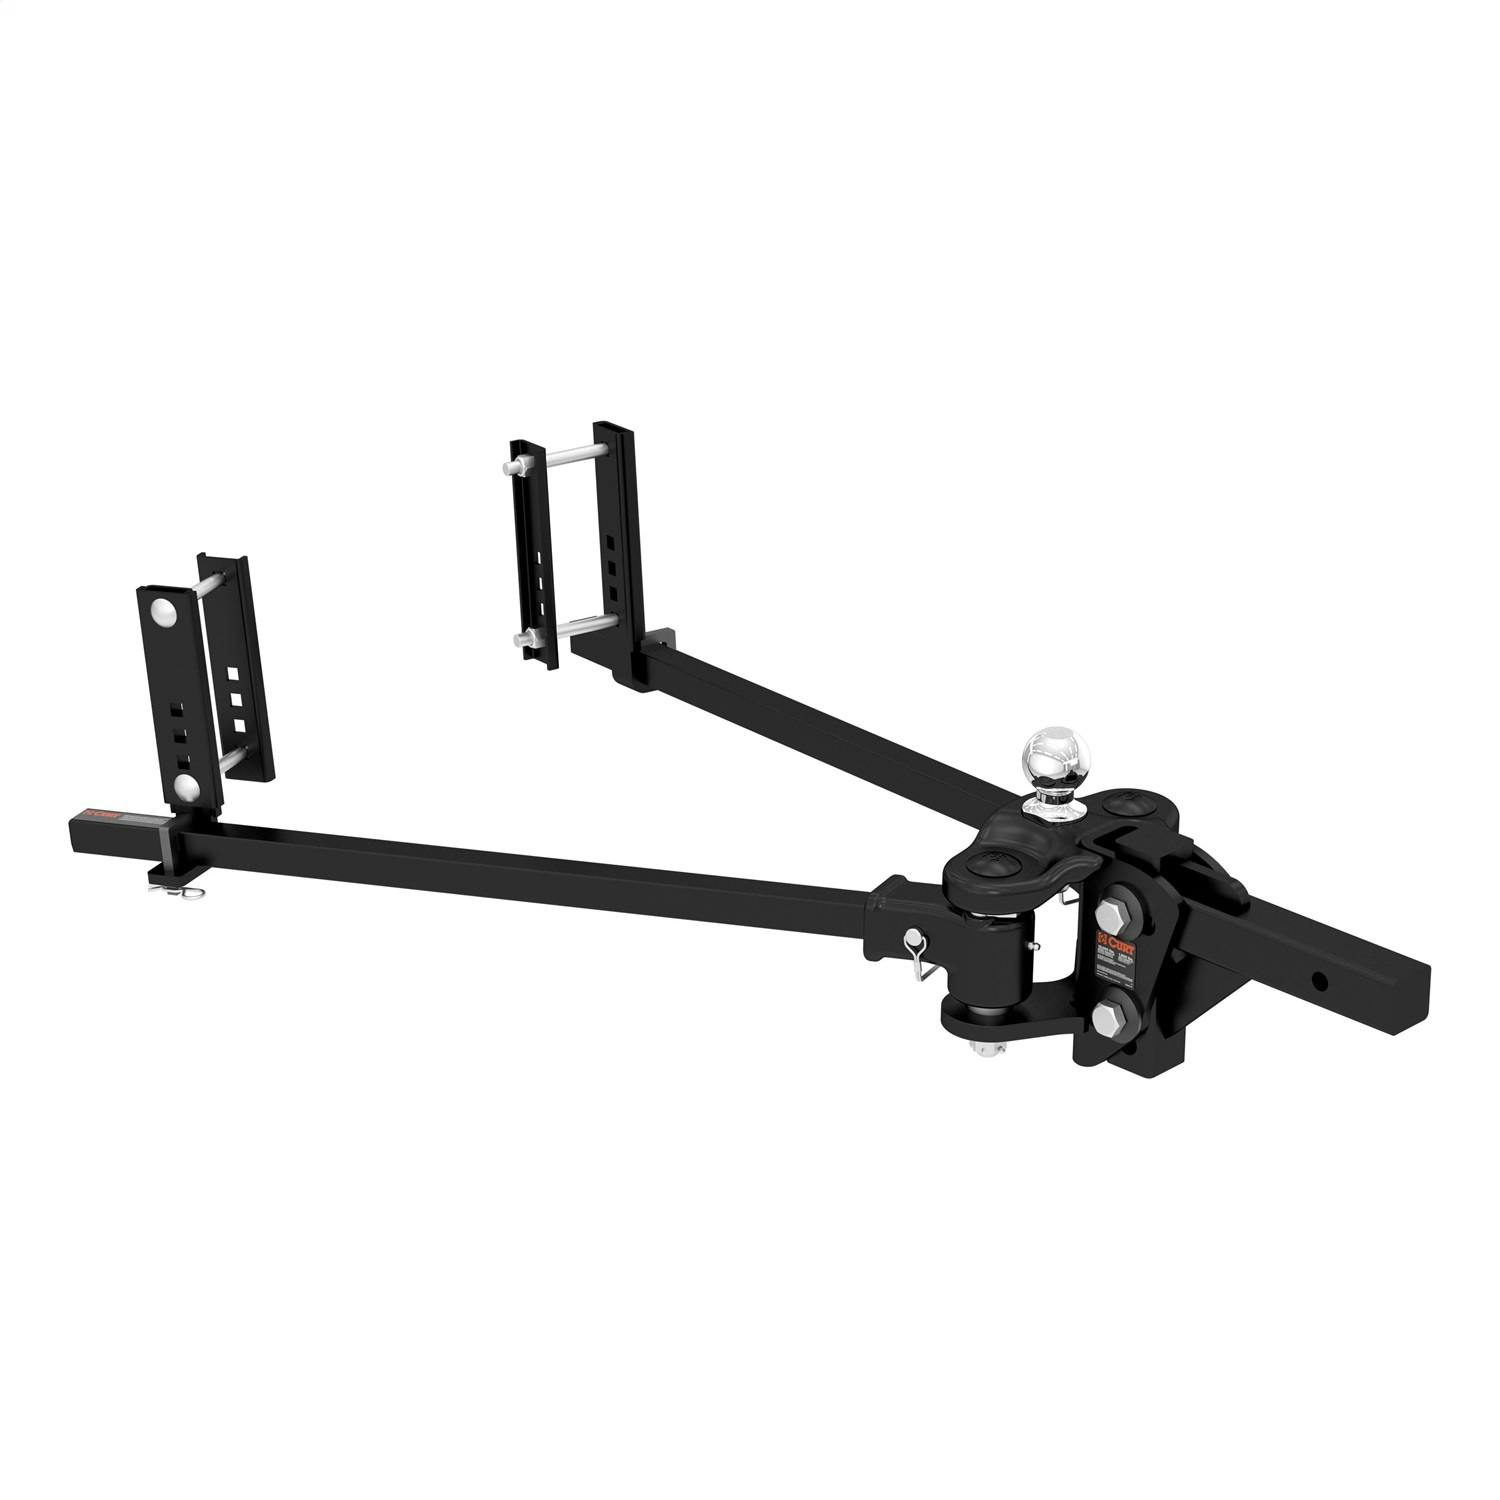 CURT 17501 TruTrack Trunnion Bar Weight Distribution Hitch Black with Sway Control 2-5/16-Inch Ball 2-Inch Shank Up to 15,000 lbs 